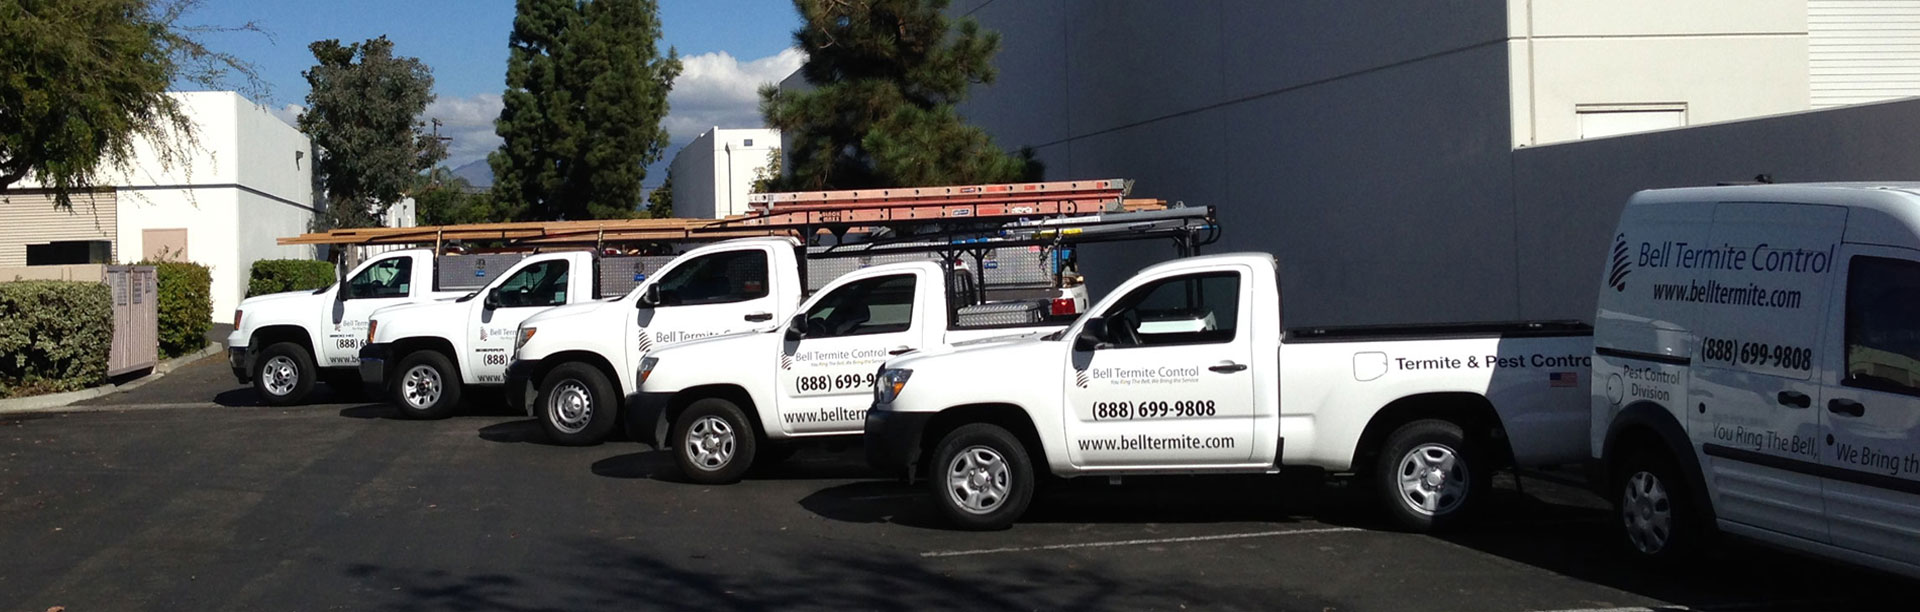 Free Termite Inspection in Rancho Cucamonga